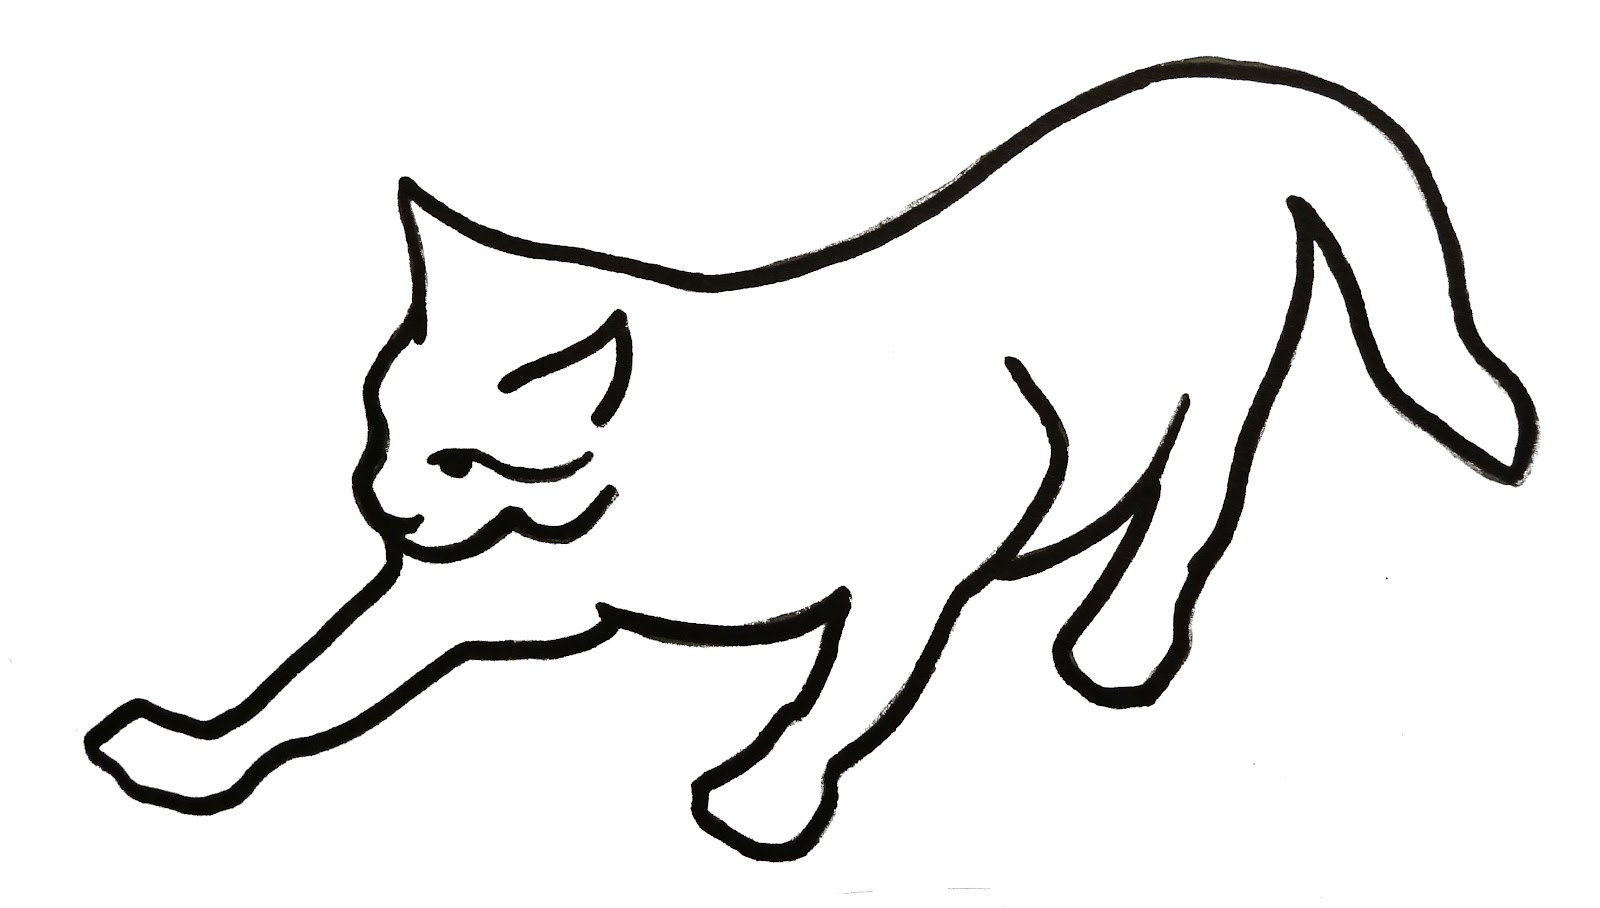 Images Of Drawn Cats - ClipArt Best